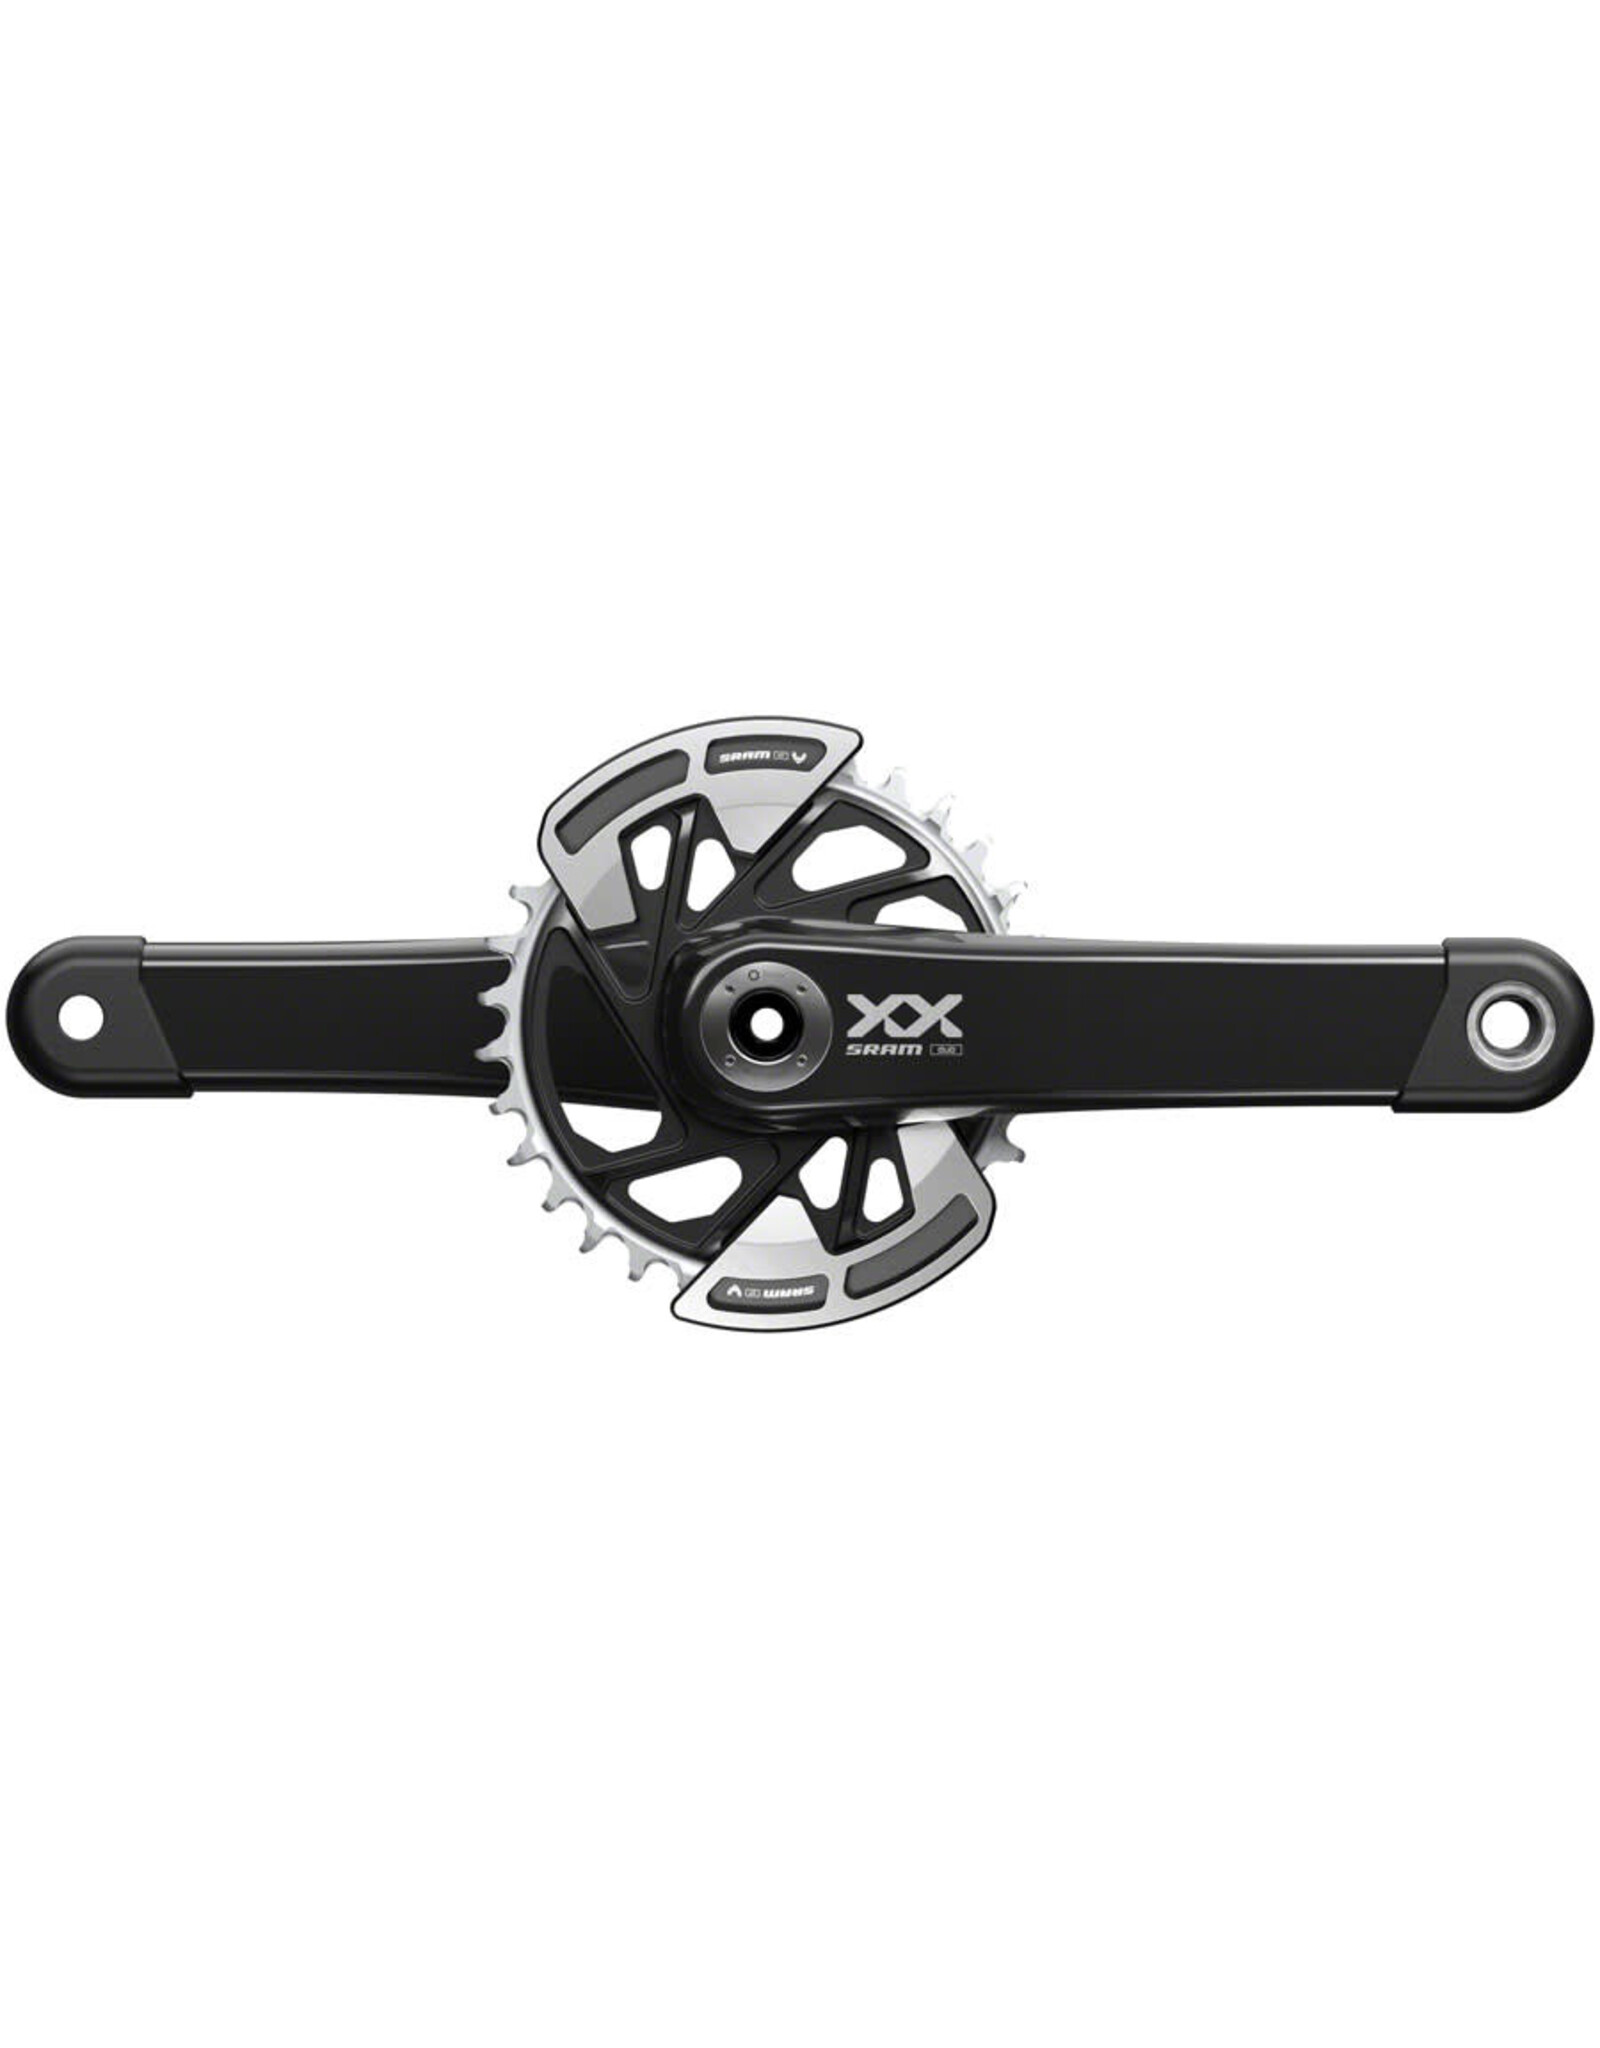 SRAM SRAM XX Eagle T-Type Wide Crankset - 165mm, 12-Speed, 32t Chainring, Direct Mount, 2-Guards DUB Spindle Interface, Black